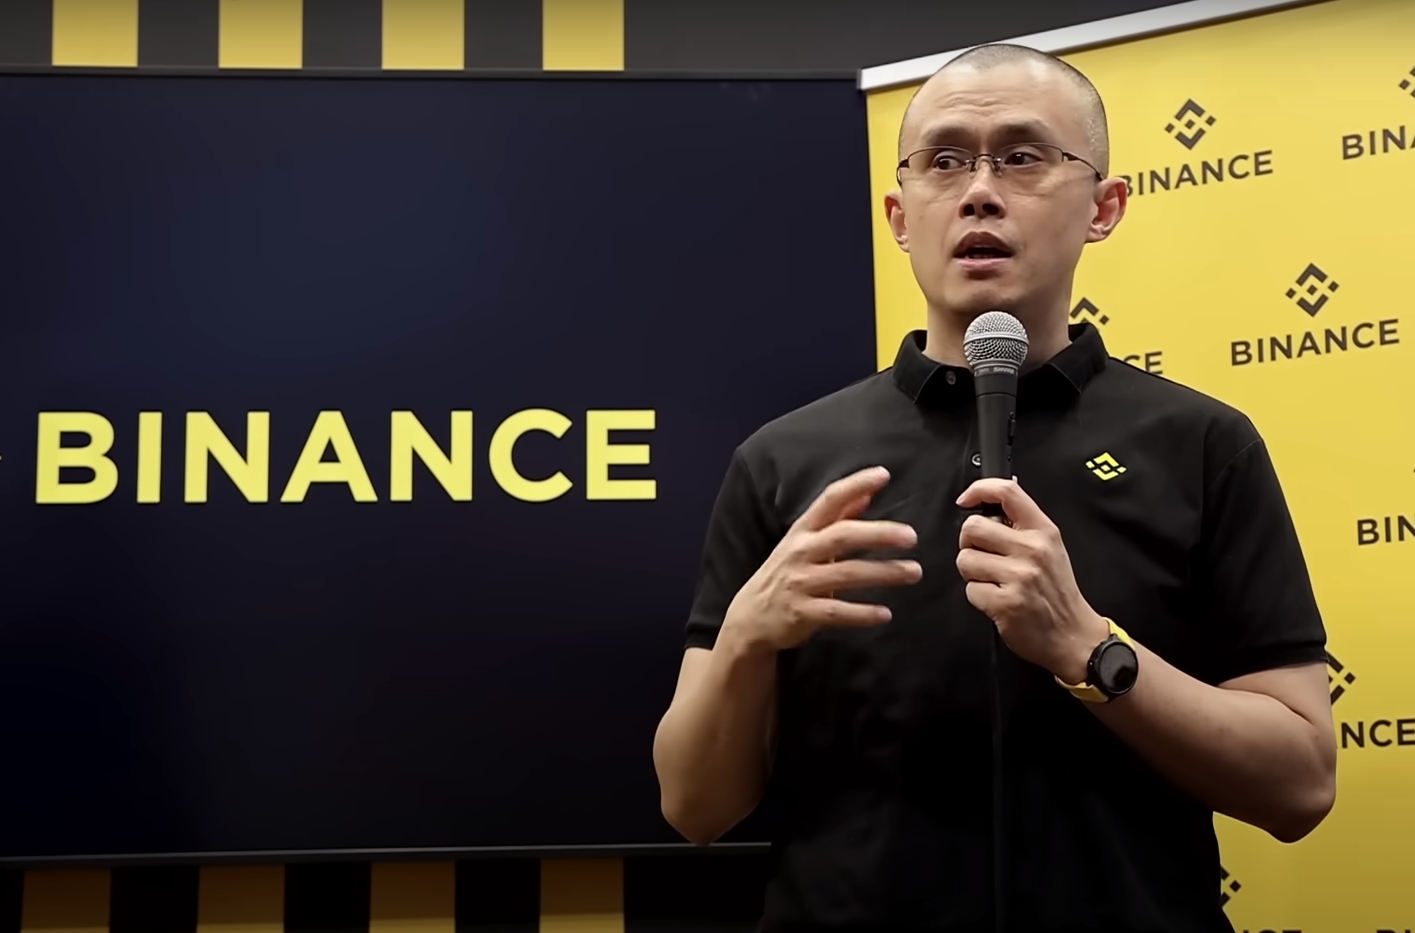 U.S. Department of Justice May Seek 10-Year Prison Term for Binance’s CZ Following Guilty Plea